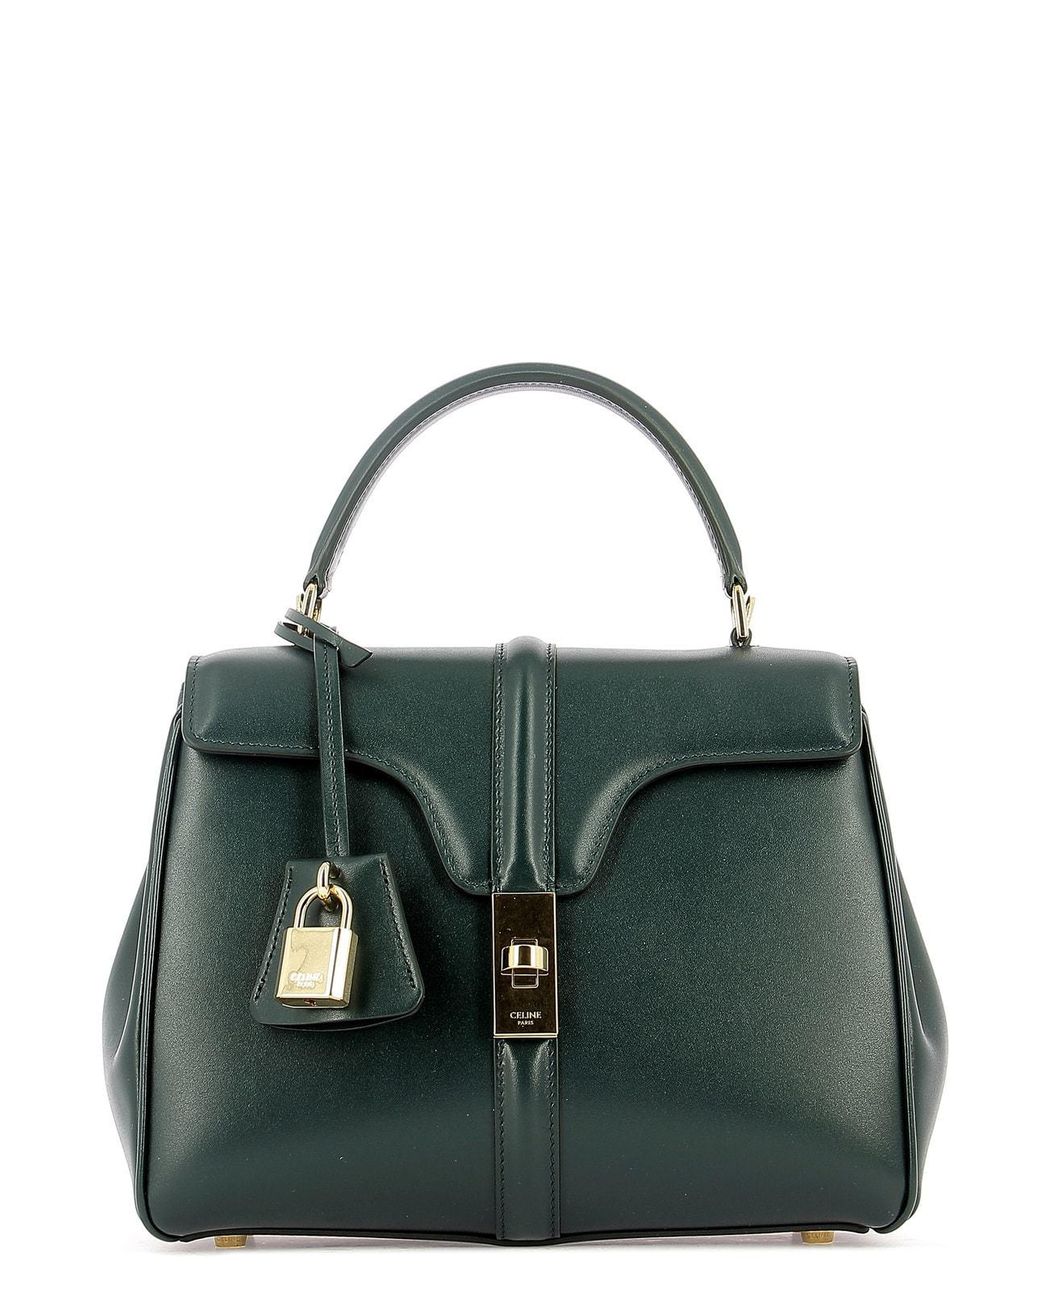 Celine Small 16 Satinated Calfskin Bag in Green | Lyst